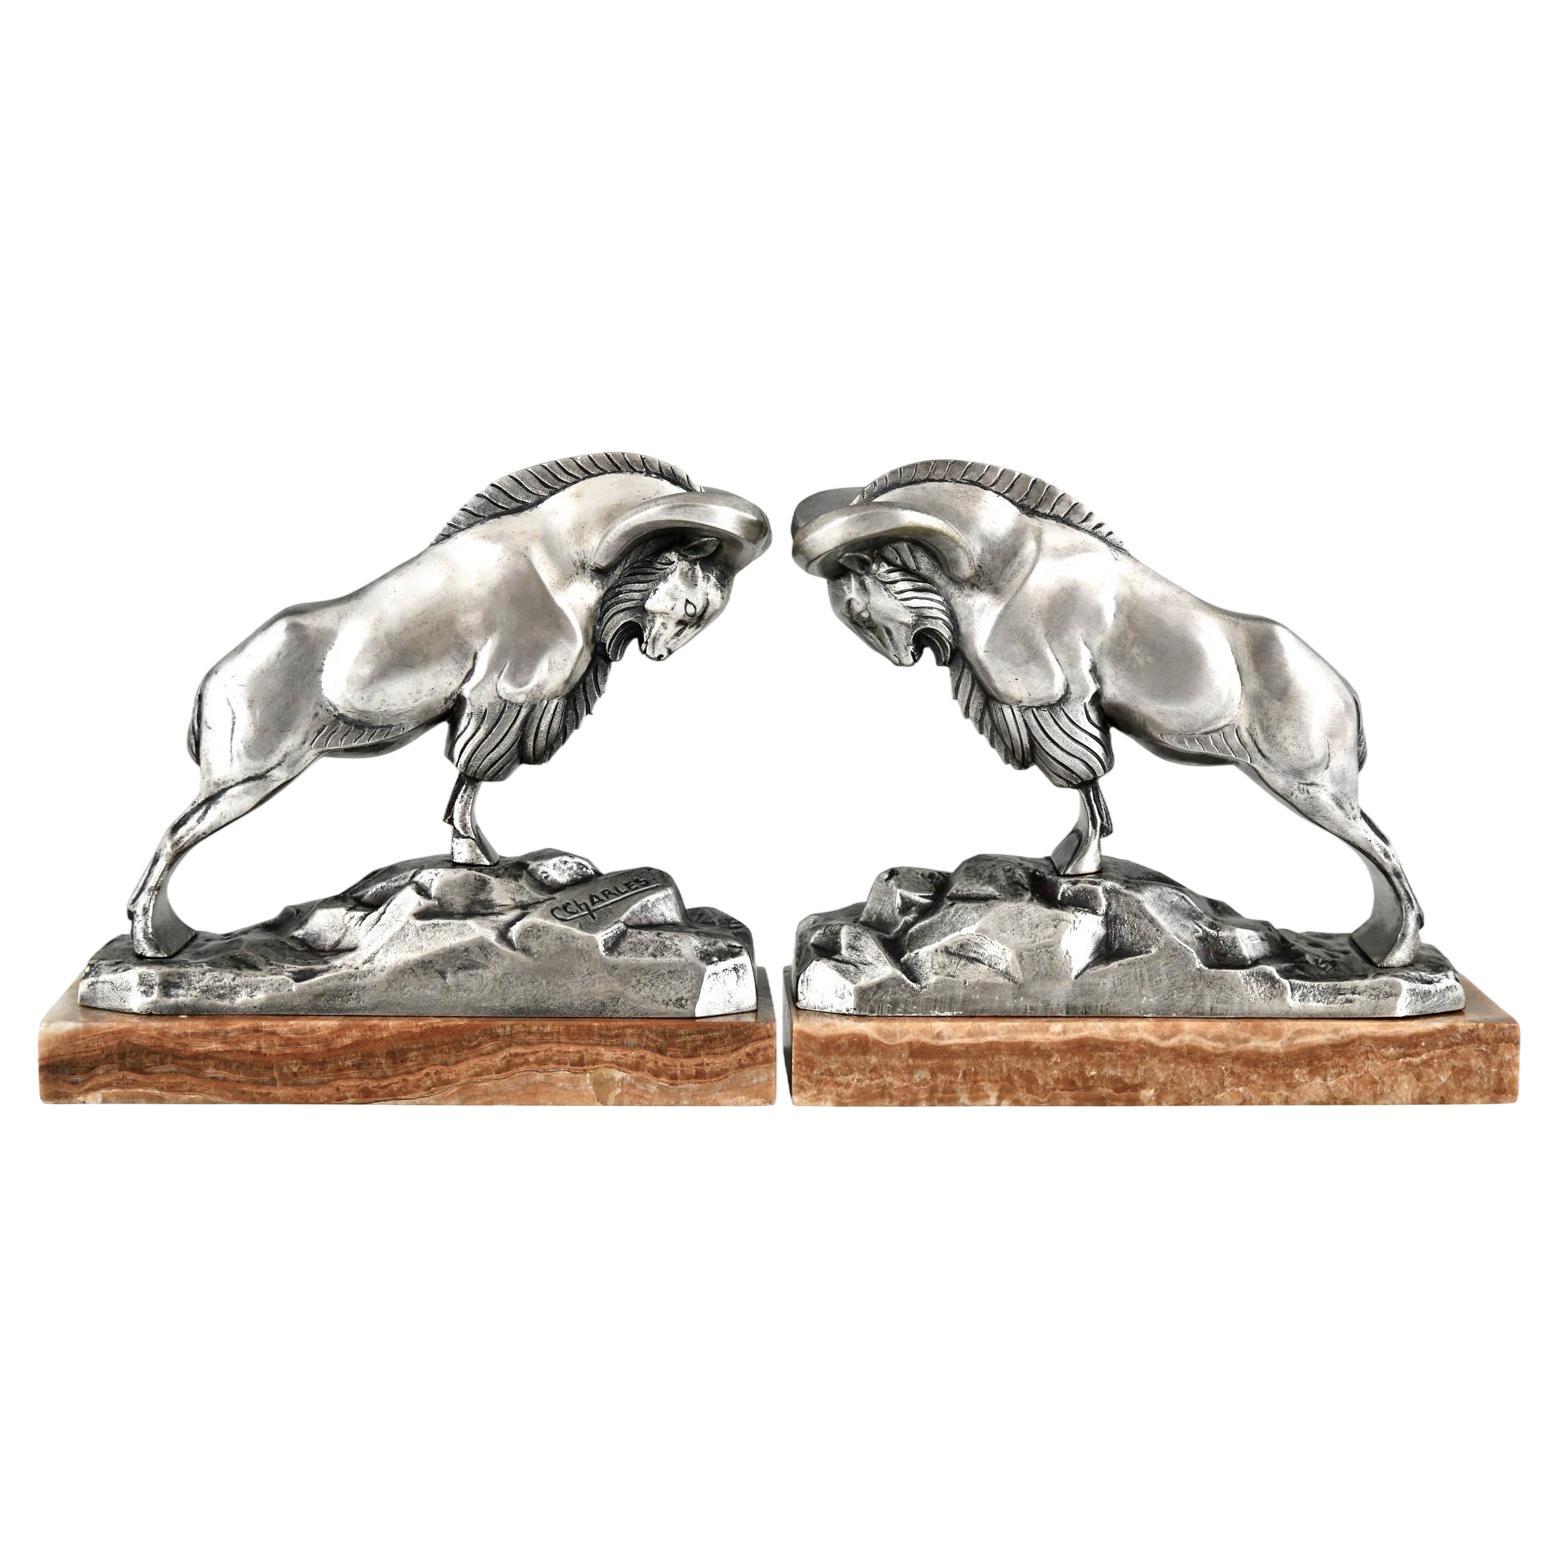 Art Deco silvered bronze ibex bookends signed by C. Charles.